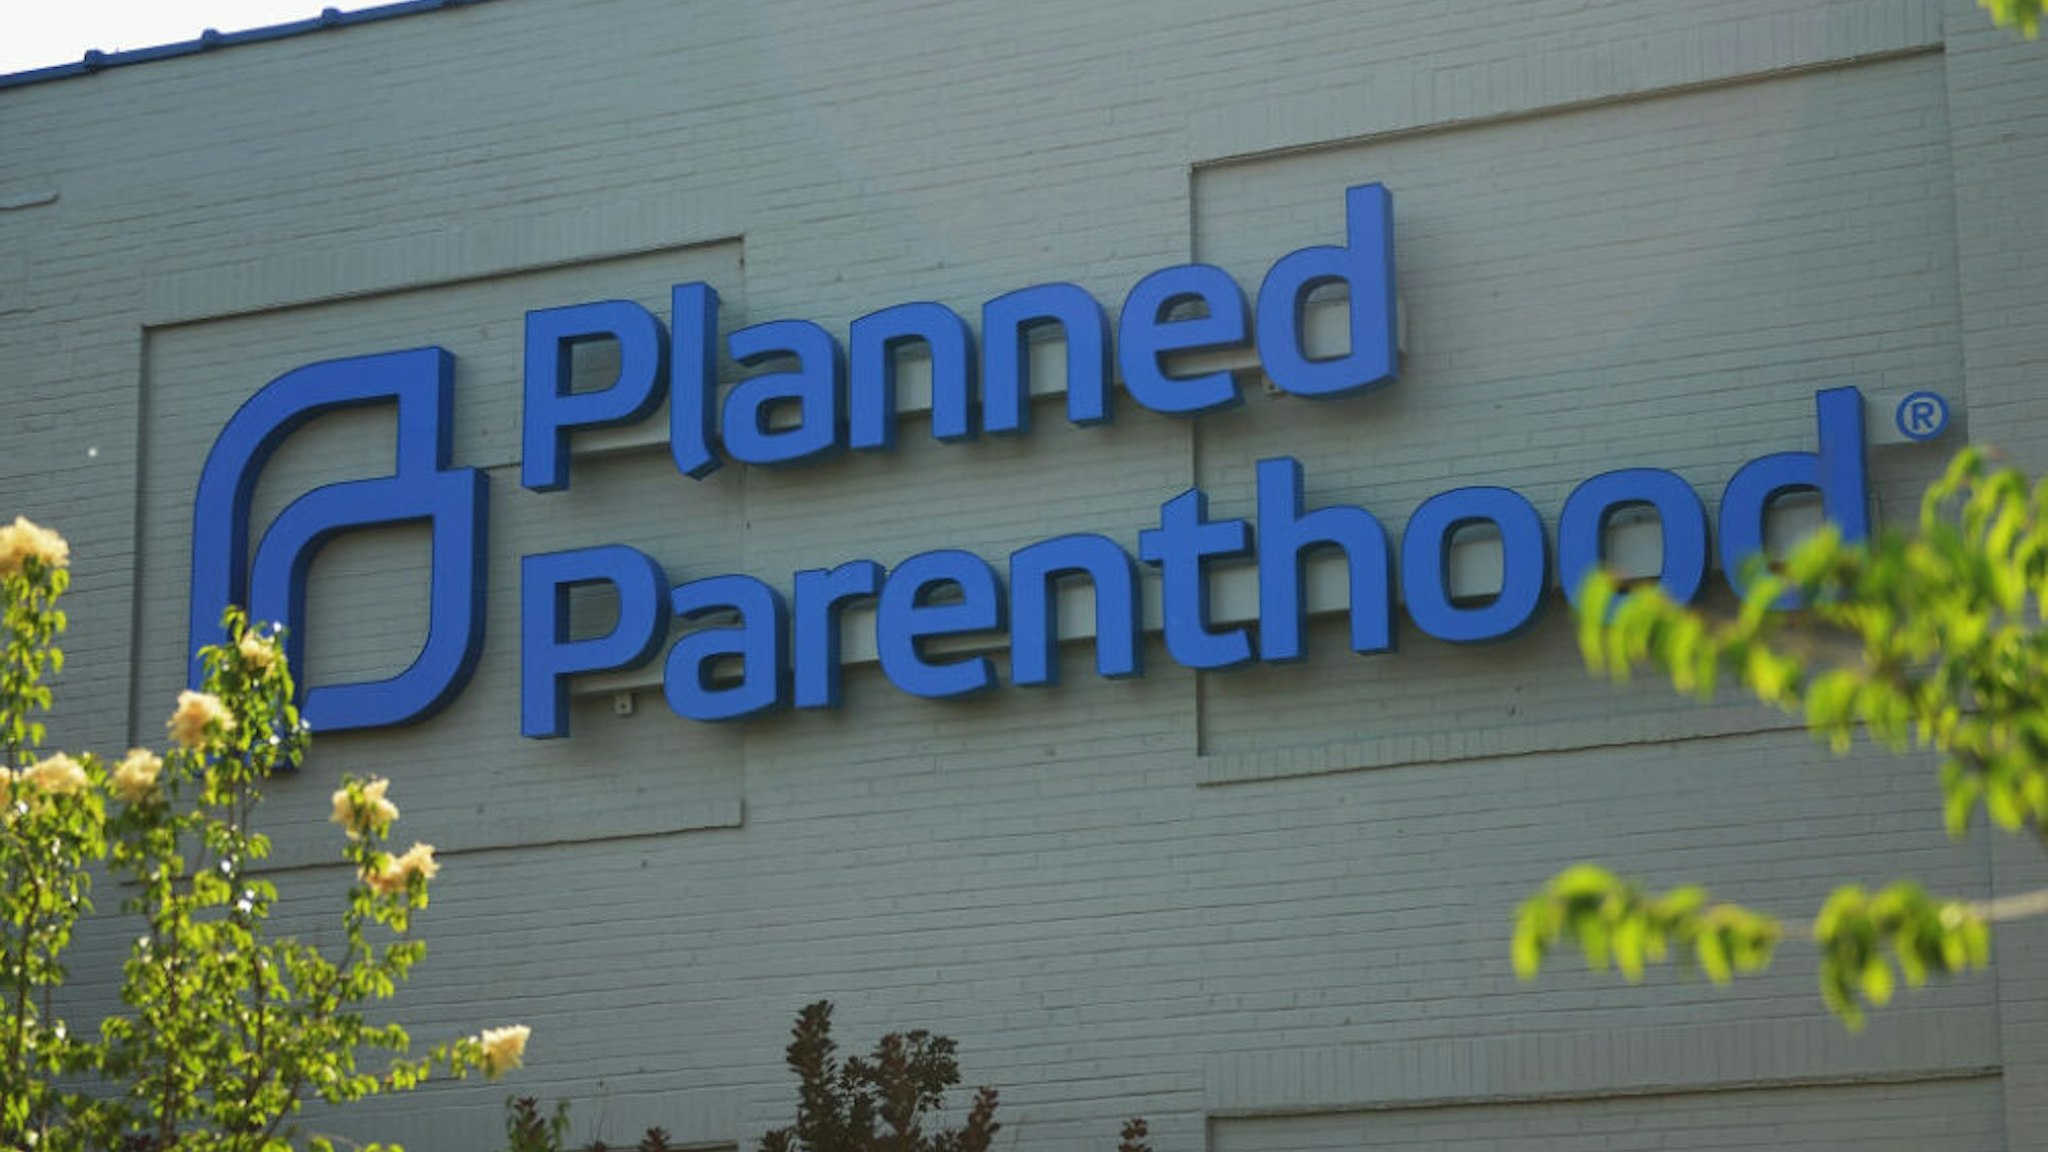 ST LOUIS, MO - MAY 31: The exterior of a Planned Parenthood Reproductive Health Services Center is seen on May 31, 2019 in St Louis, Missouri. In the wake of Missouri recent controversial abortion legislation, the states' last abortion clinic is being forced to close by the end of the week. Planned Parenthood is expected to go to court to try and stop the closing.